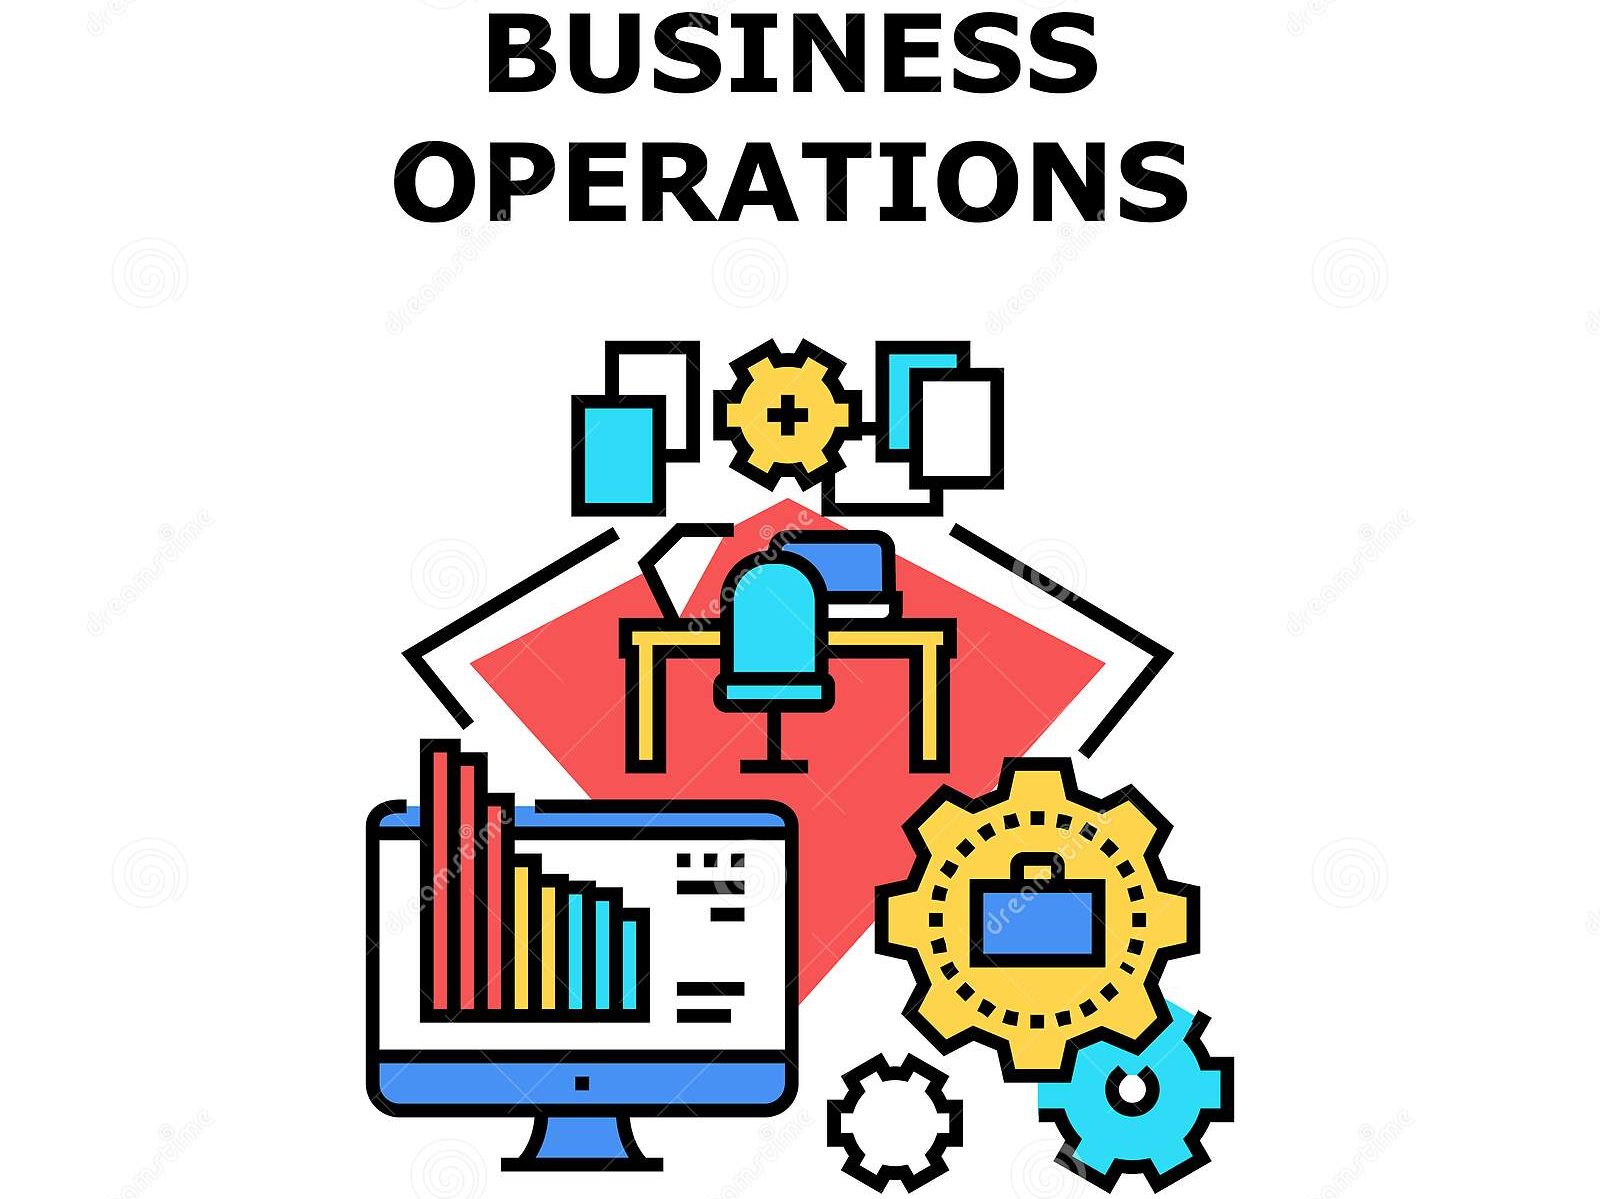 Finance Operations in Business